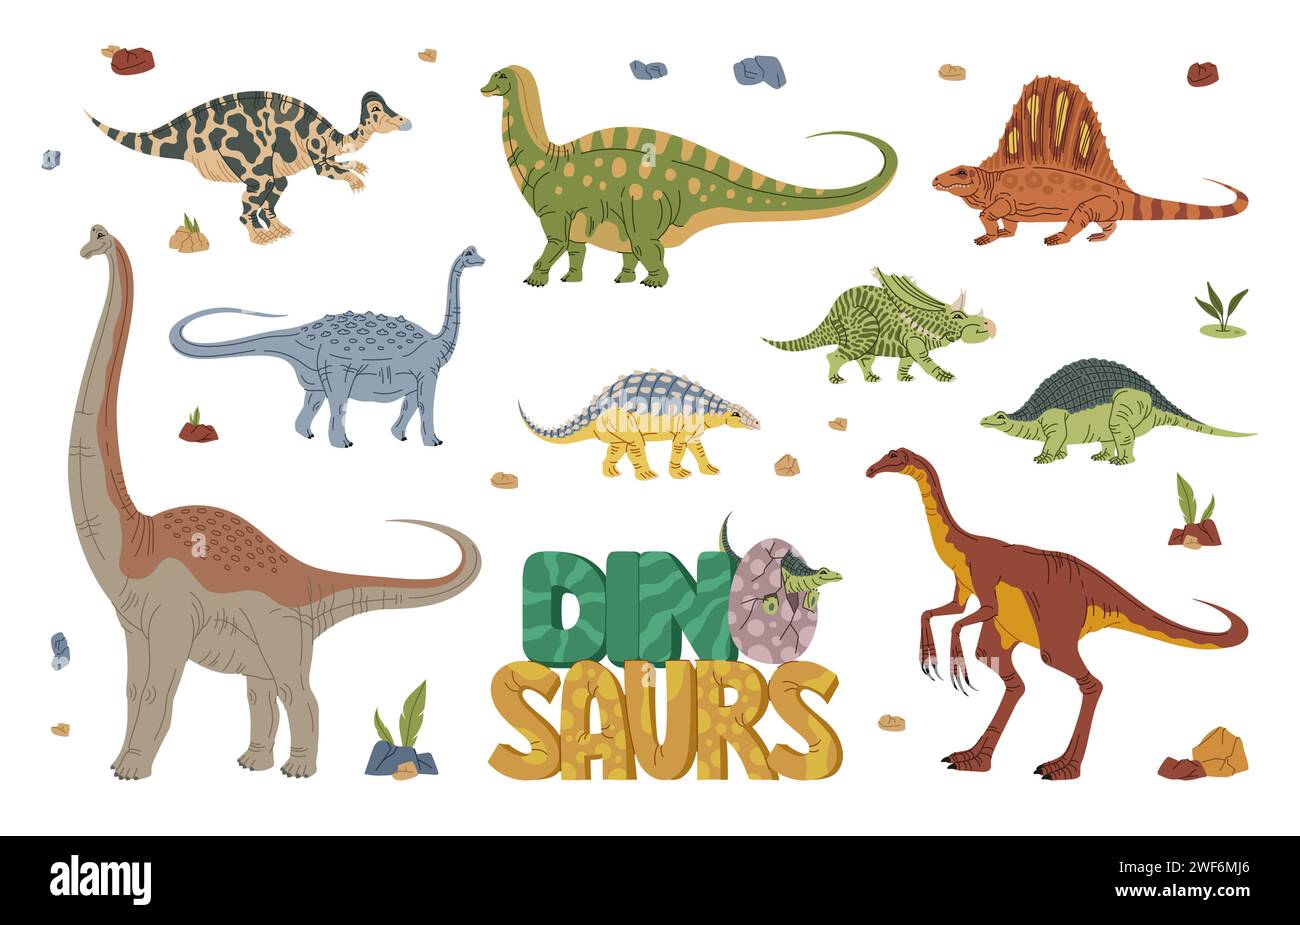 Dinosaurs, cartoon characters and Jurassic reptiles for dino park vector collection. Funny dino or dinosaur species for children prehistoric education, extinct reptiles world game and monster lizards Stock Vector